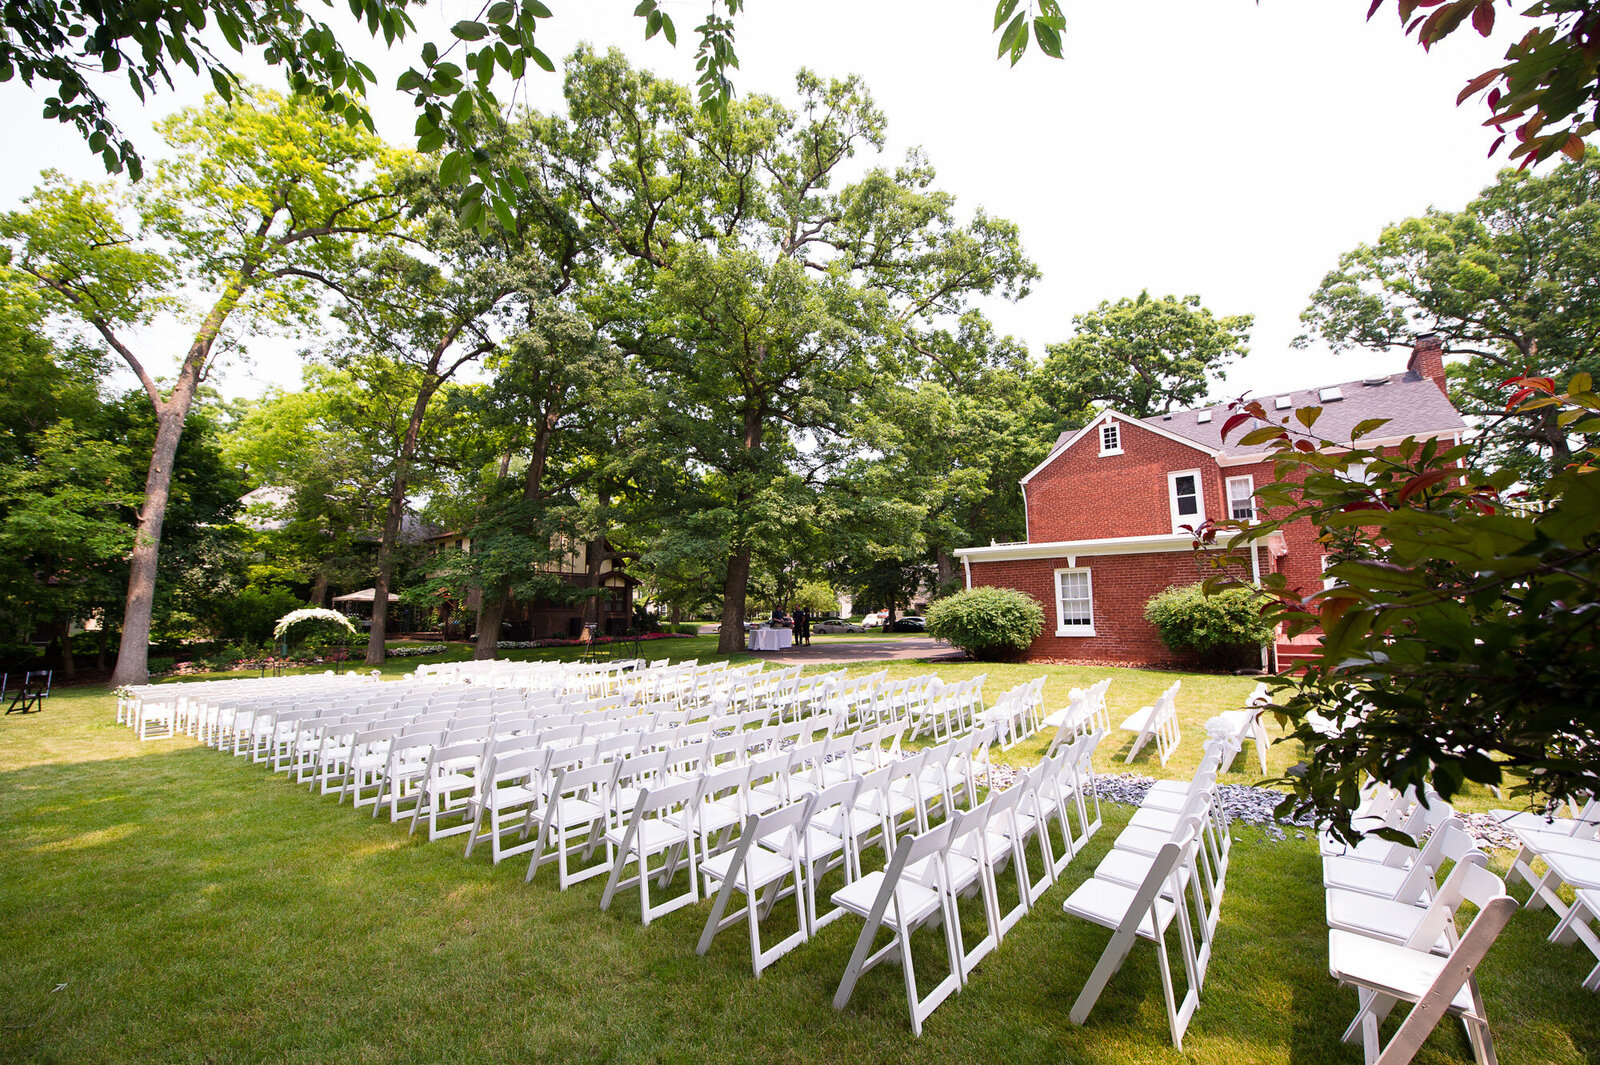 Wedding ceremony site outside with white chairs, trees and a barn